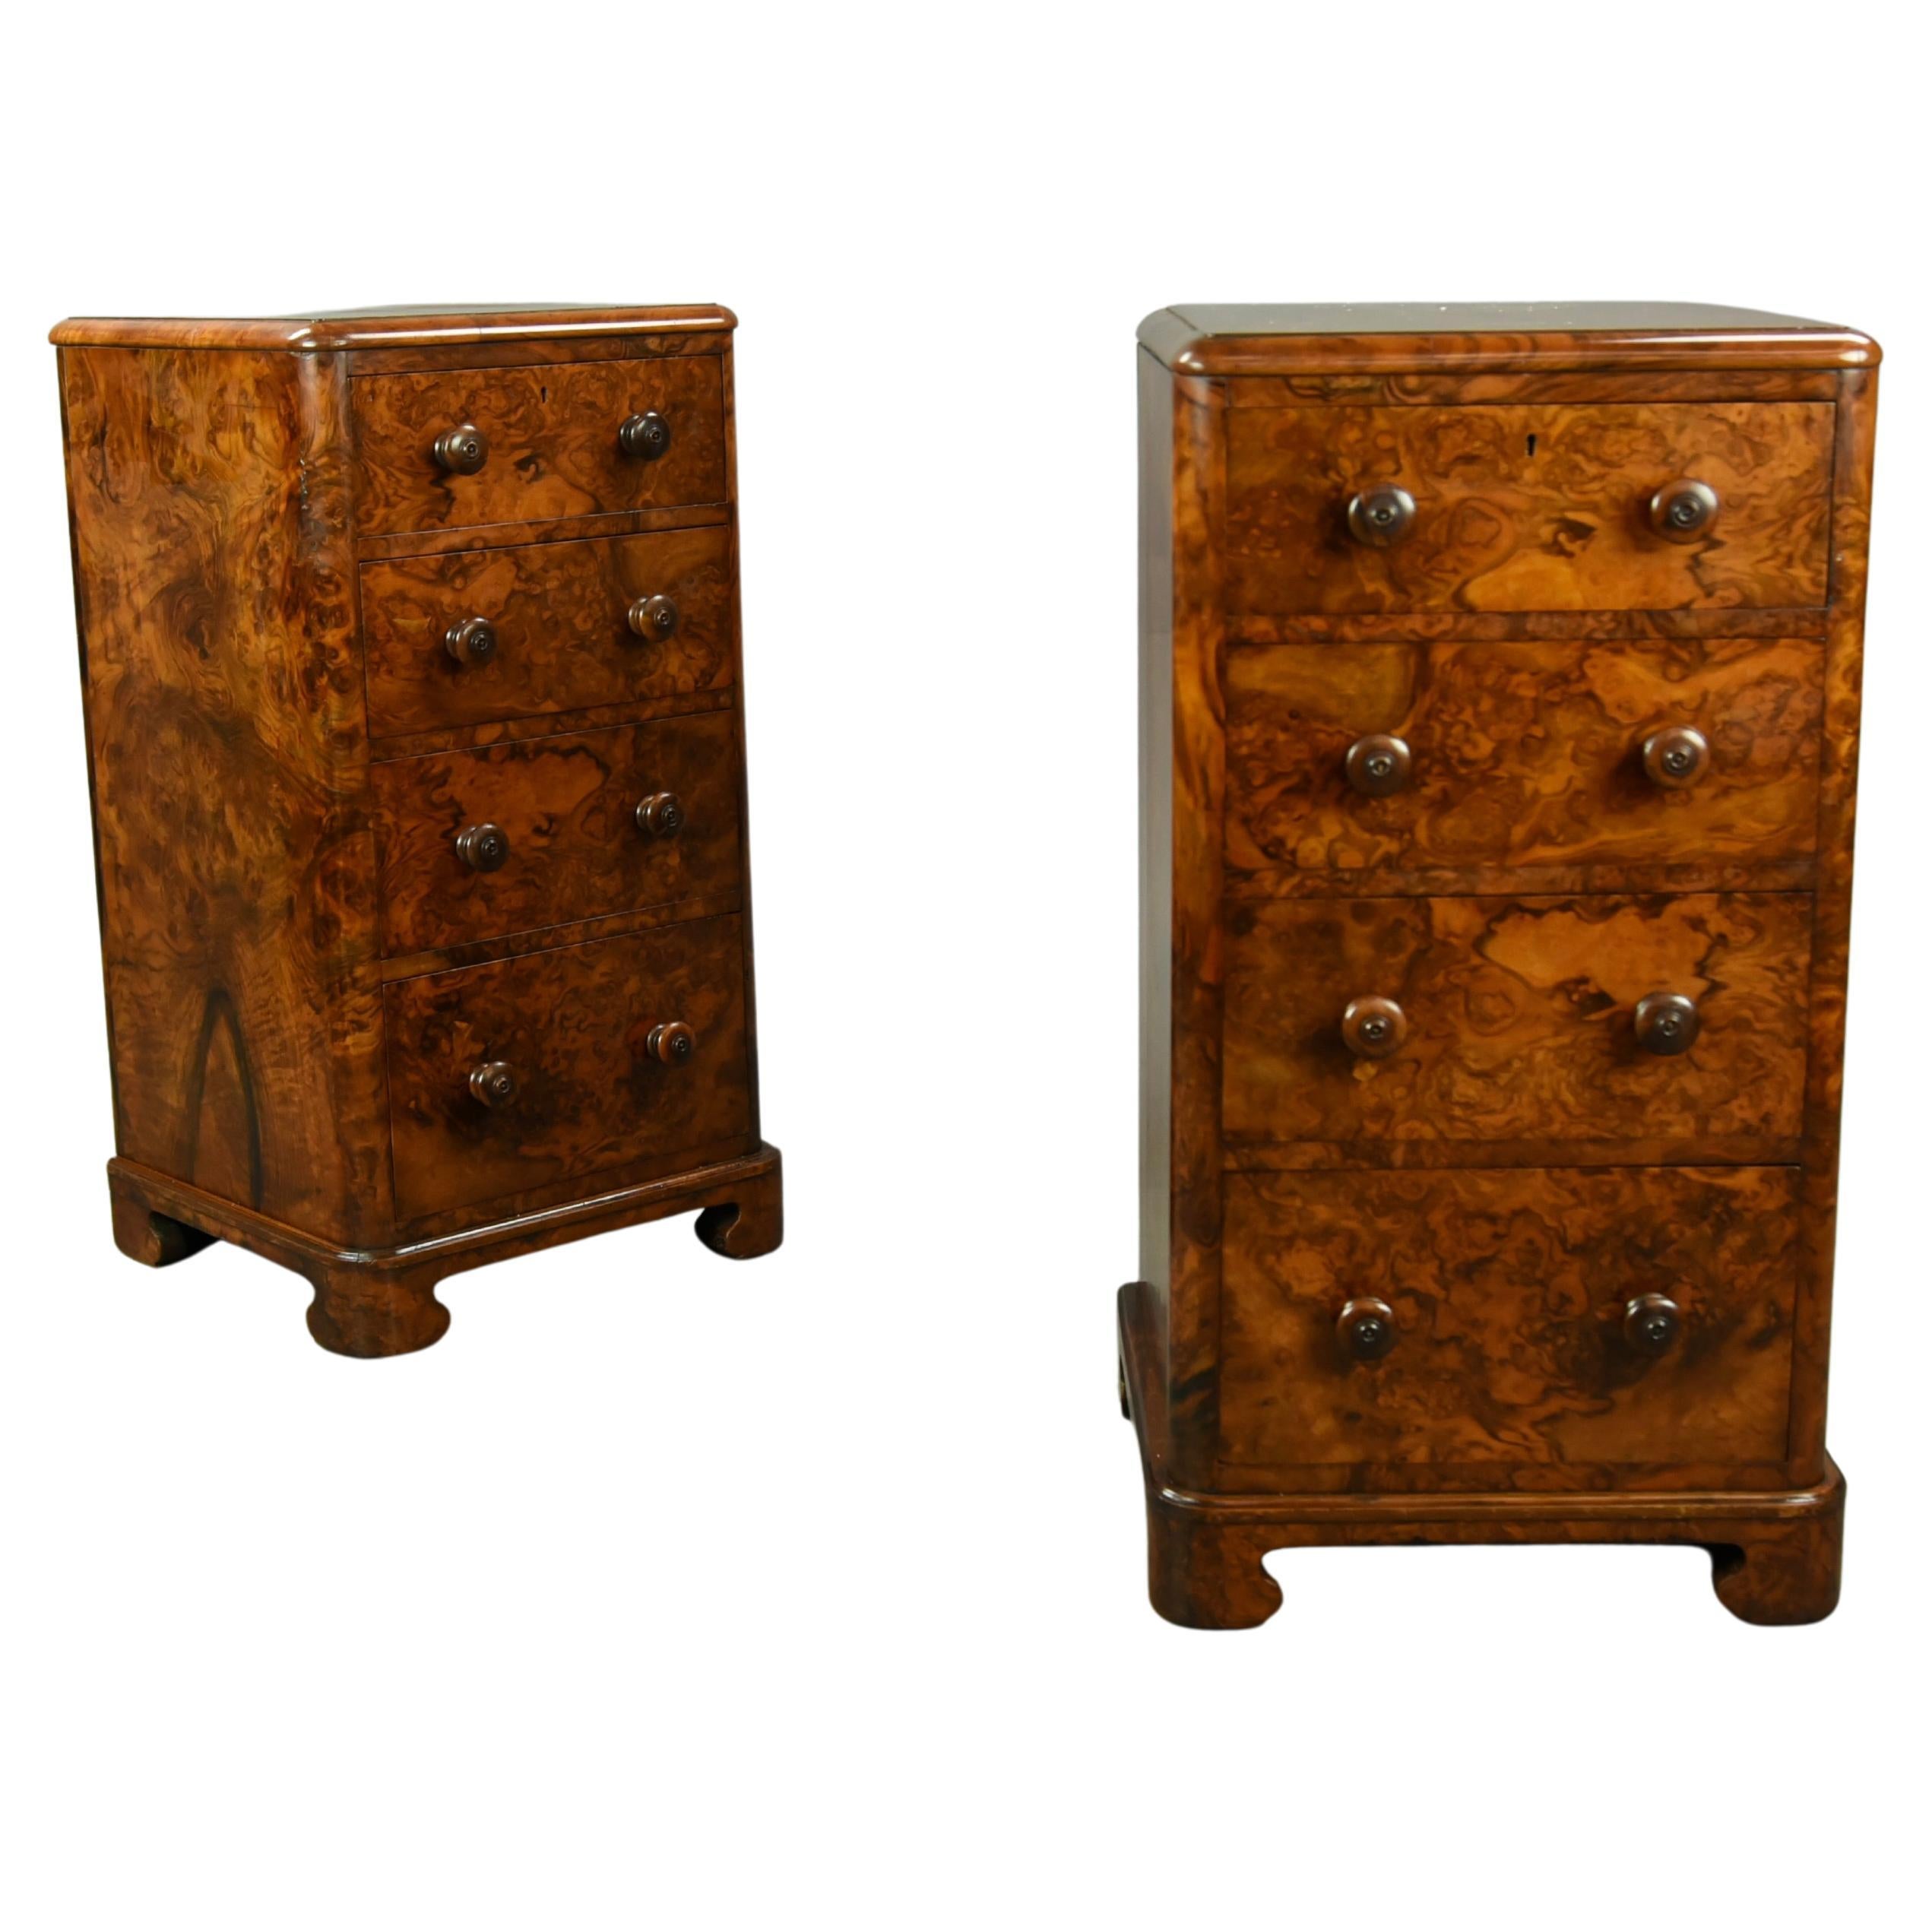 English Pair of Antique Burr Walnut Bedside Chests of Drawers Nite Stands